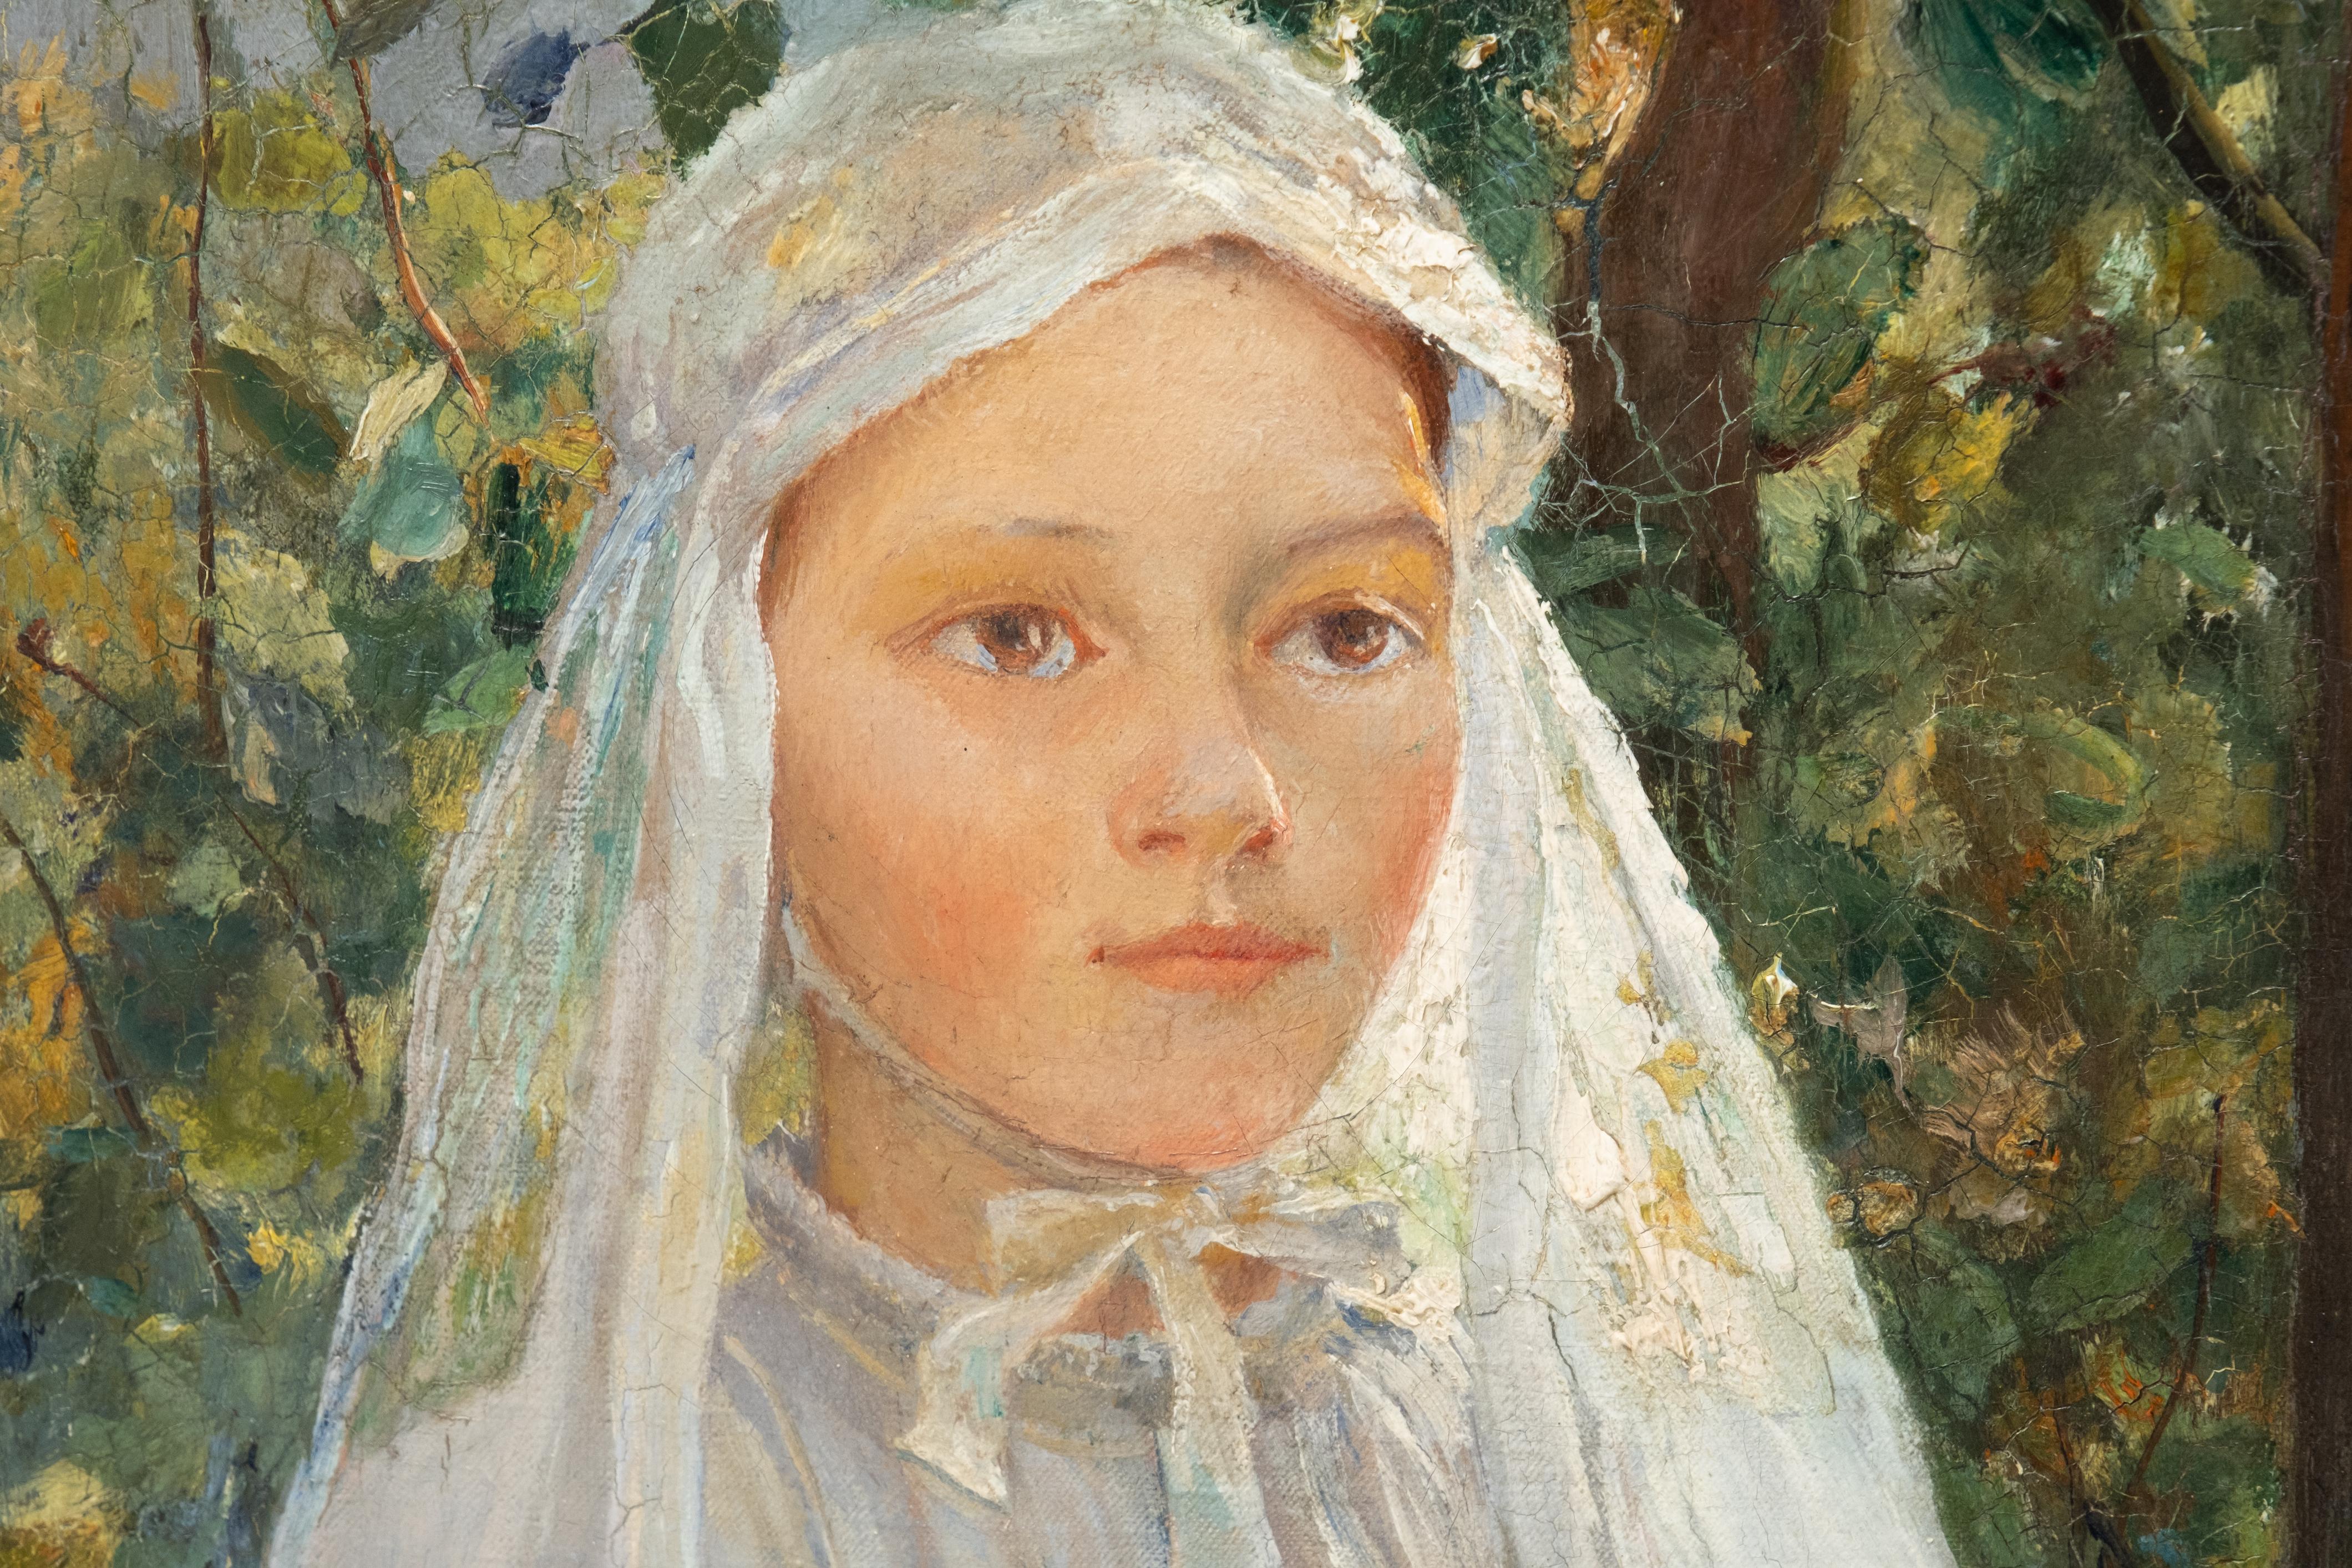 Signed Will Hicok Low, 'Young French Girl on her First Communion'. Oil on Canvas 1